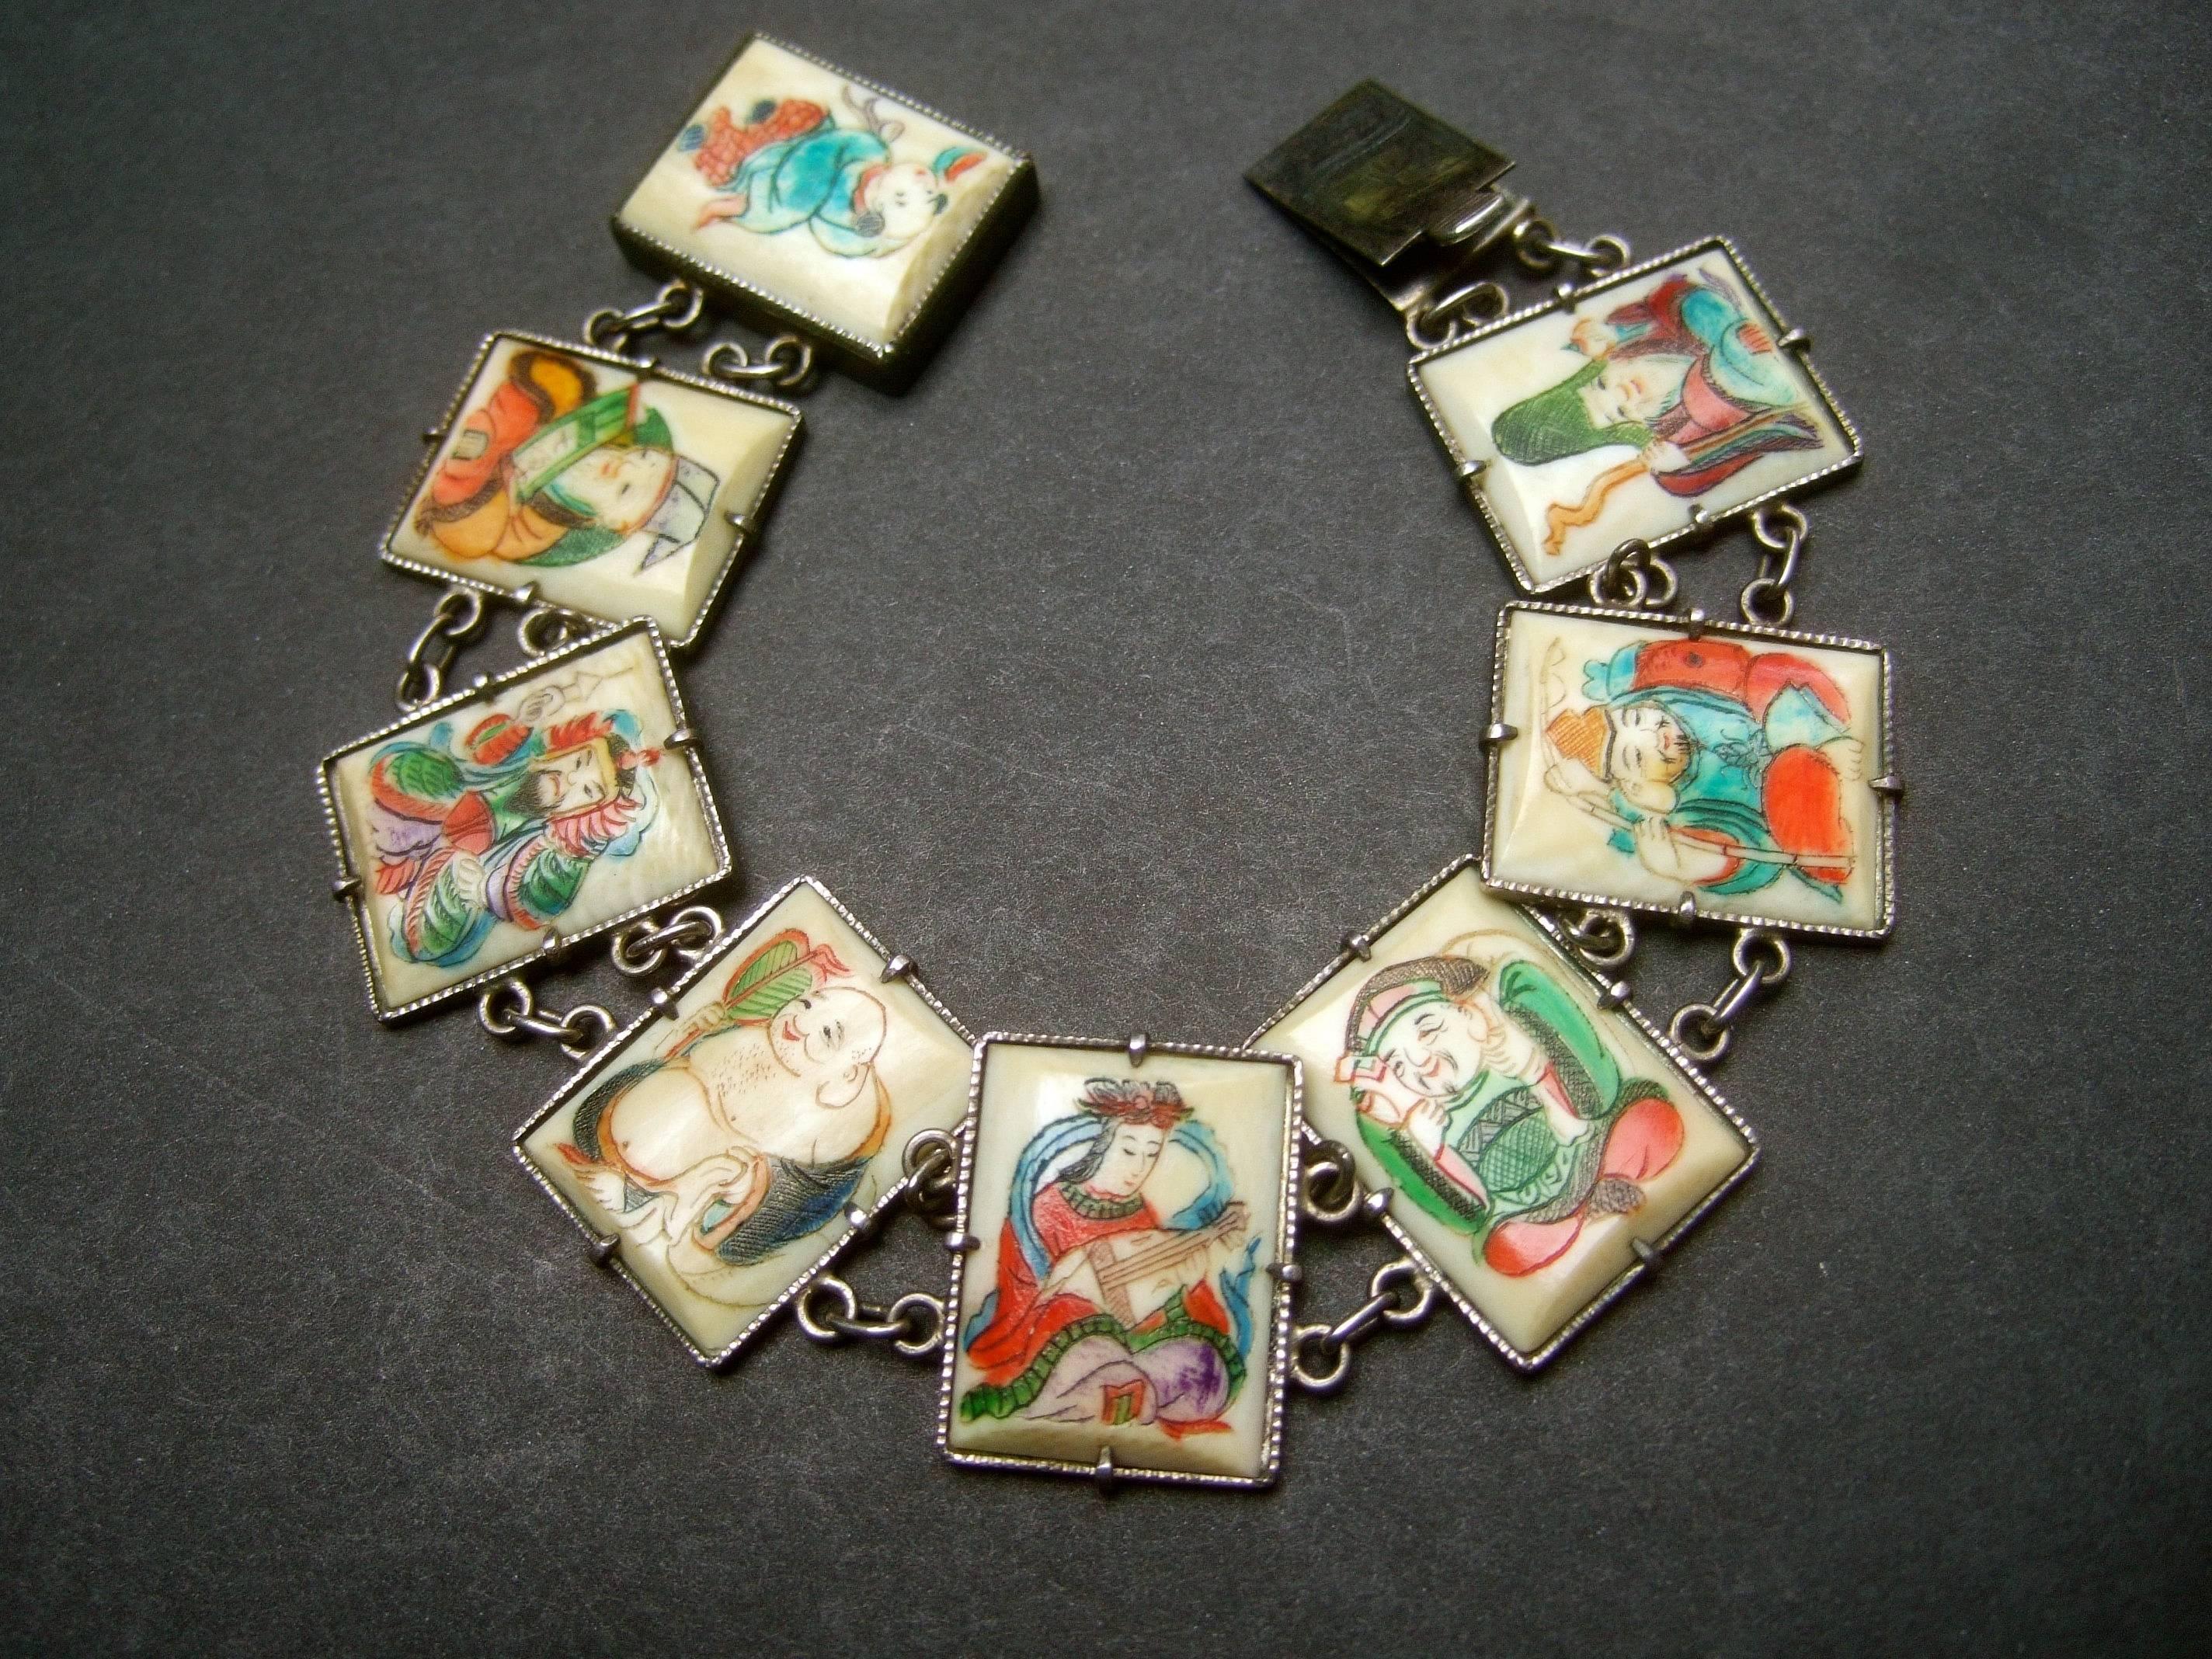 Exotic Chinese Eight immortals sterling link bracelet ca 1930s
The rare artisan bracelet is designed with thin bone 
veneer hand painted tiles set in sterling bezel links 

The eight immortals derive from Chinese mythology  
possessing the powers of